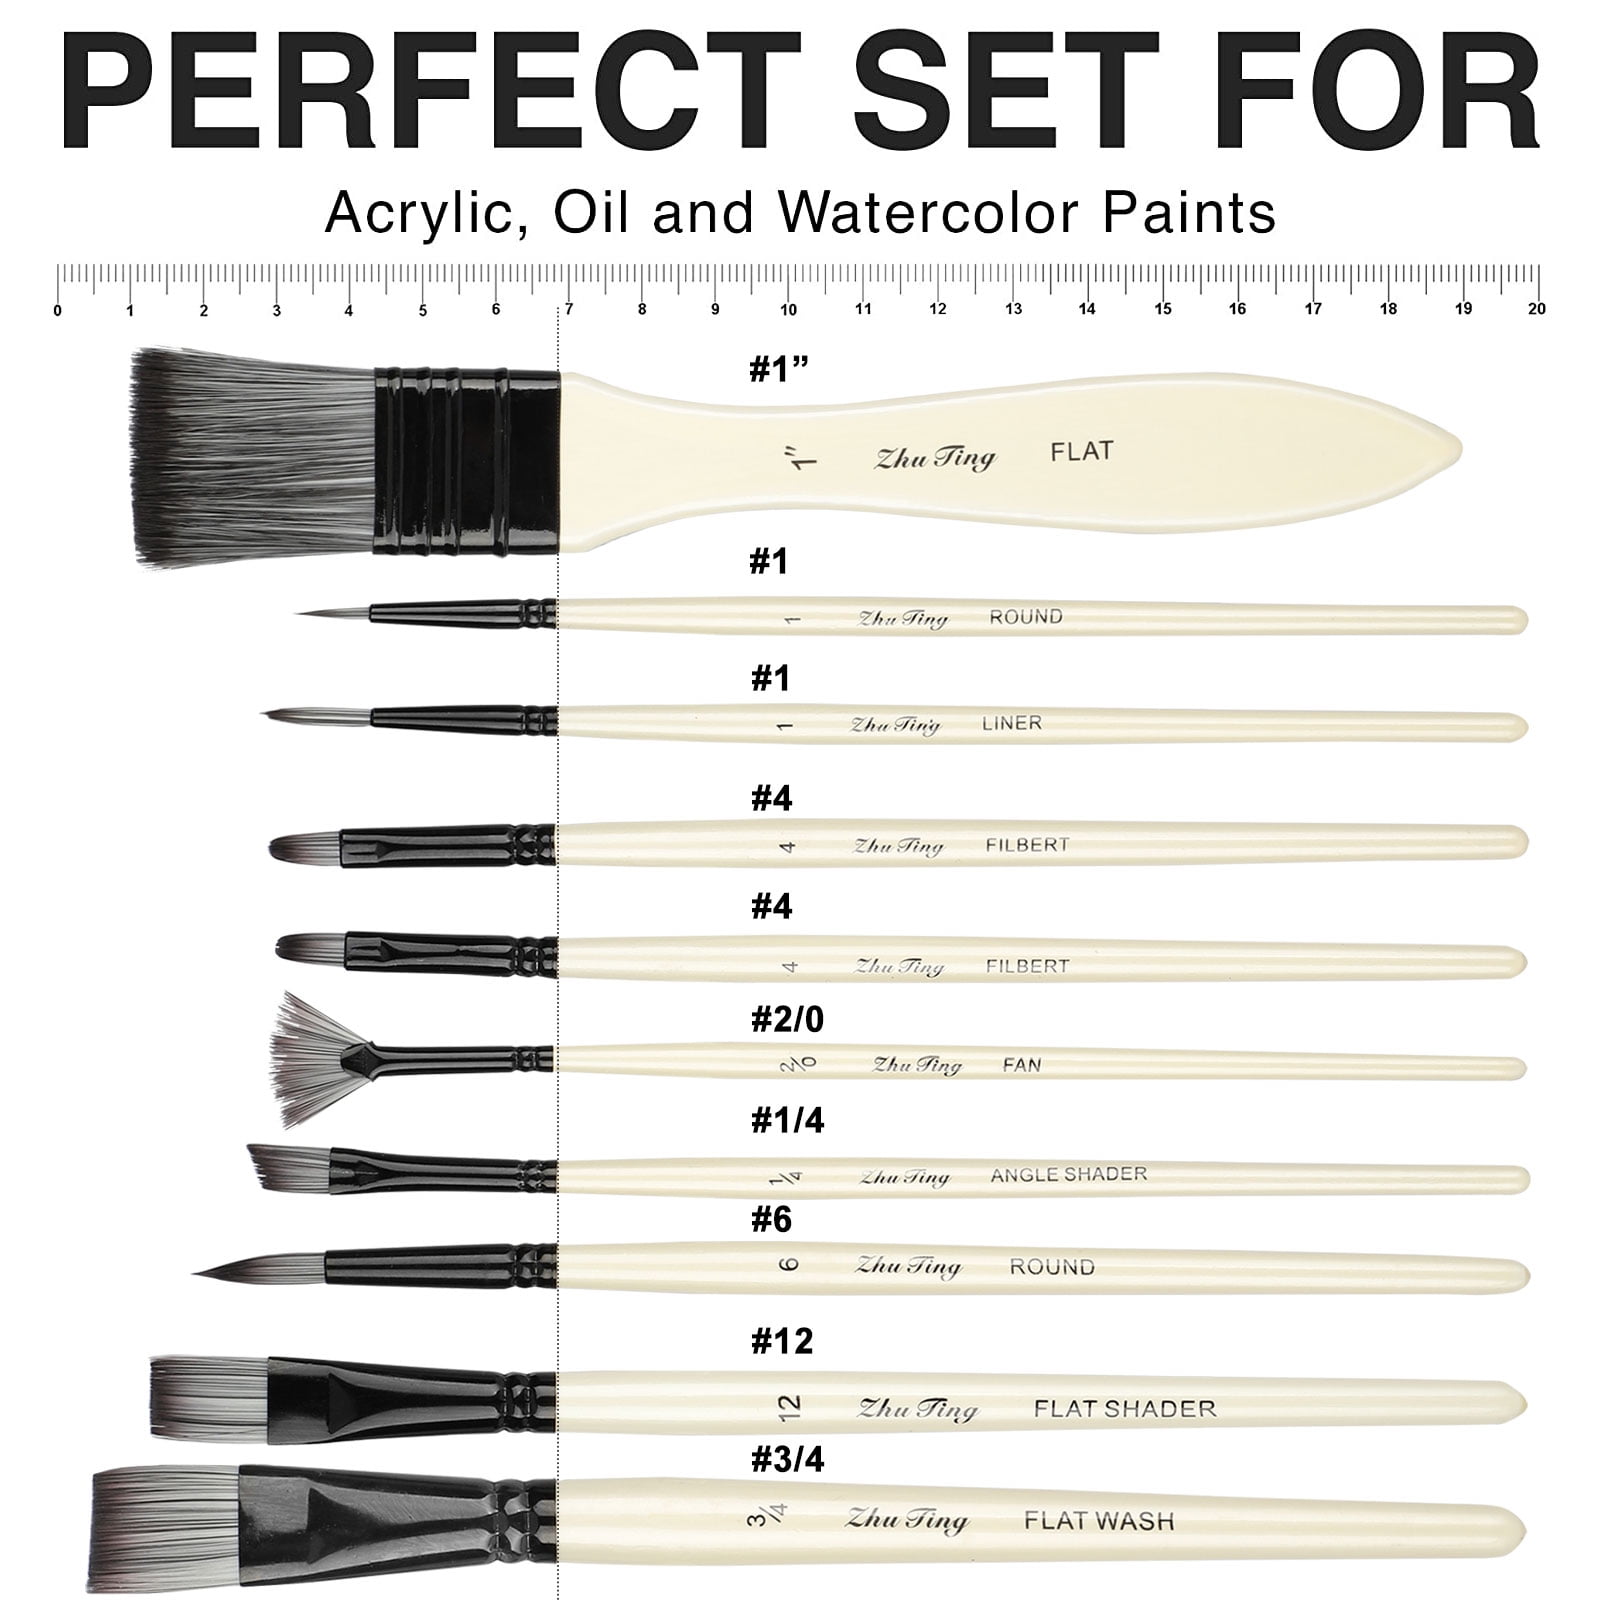 VIKEWE Professional Paint Brushes Set - 16 Pcs Paint Brush with Oil Painting Knife and Sponge, Suitable for Acrylic, Watercolor, Oil and Gouache